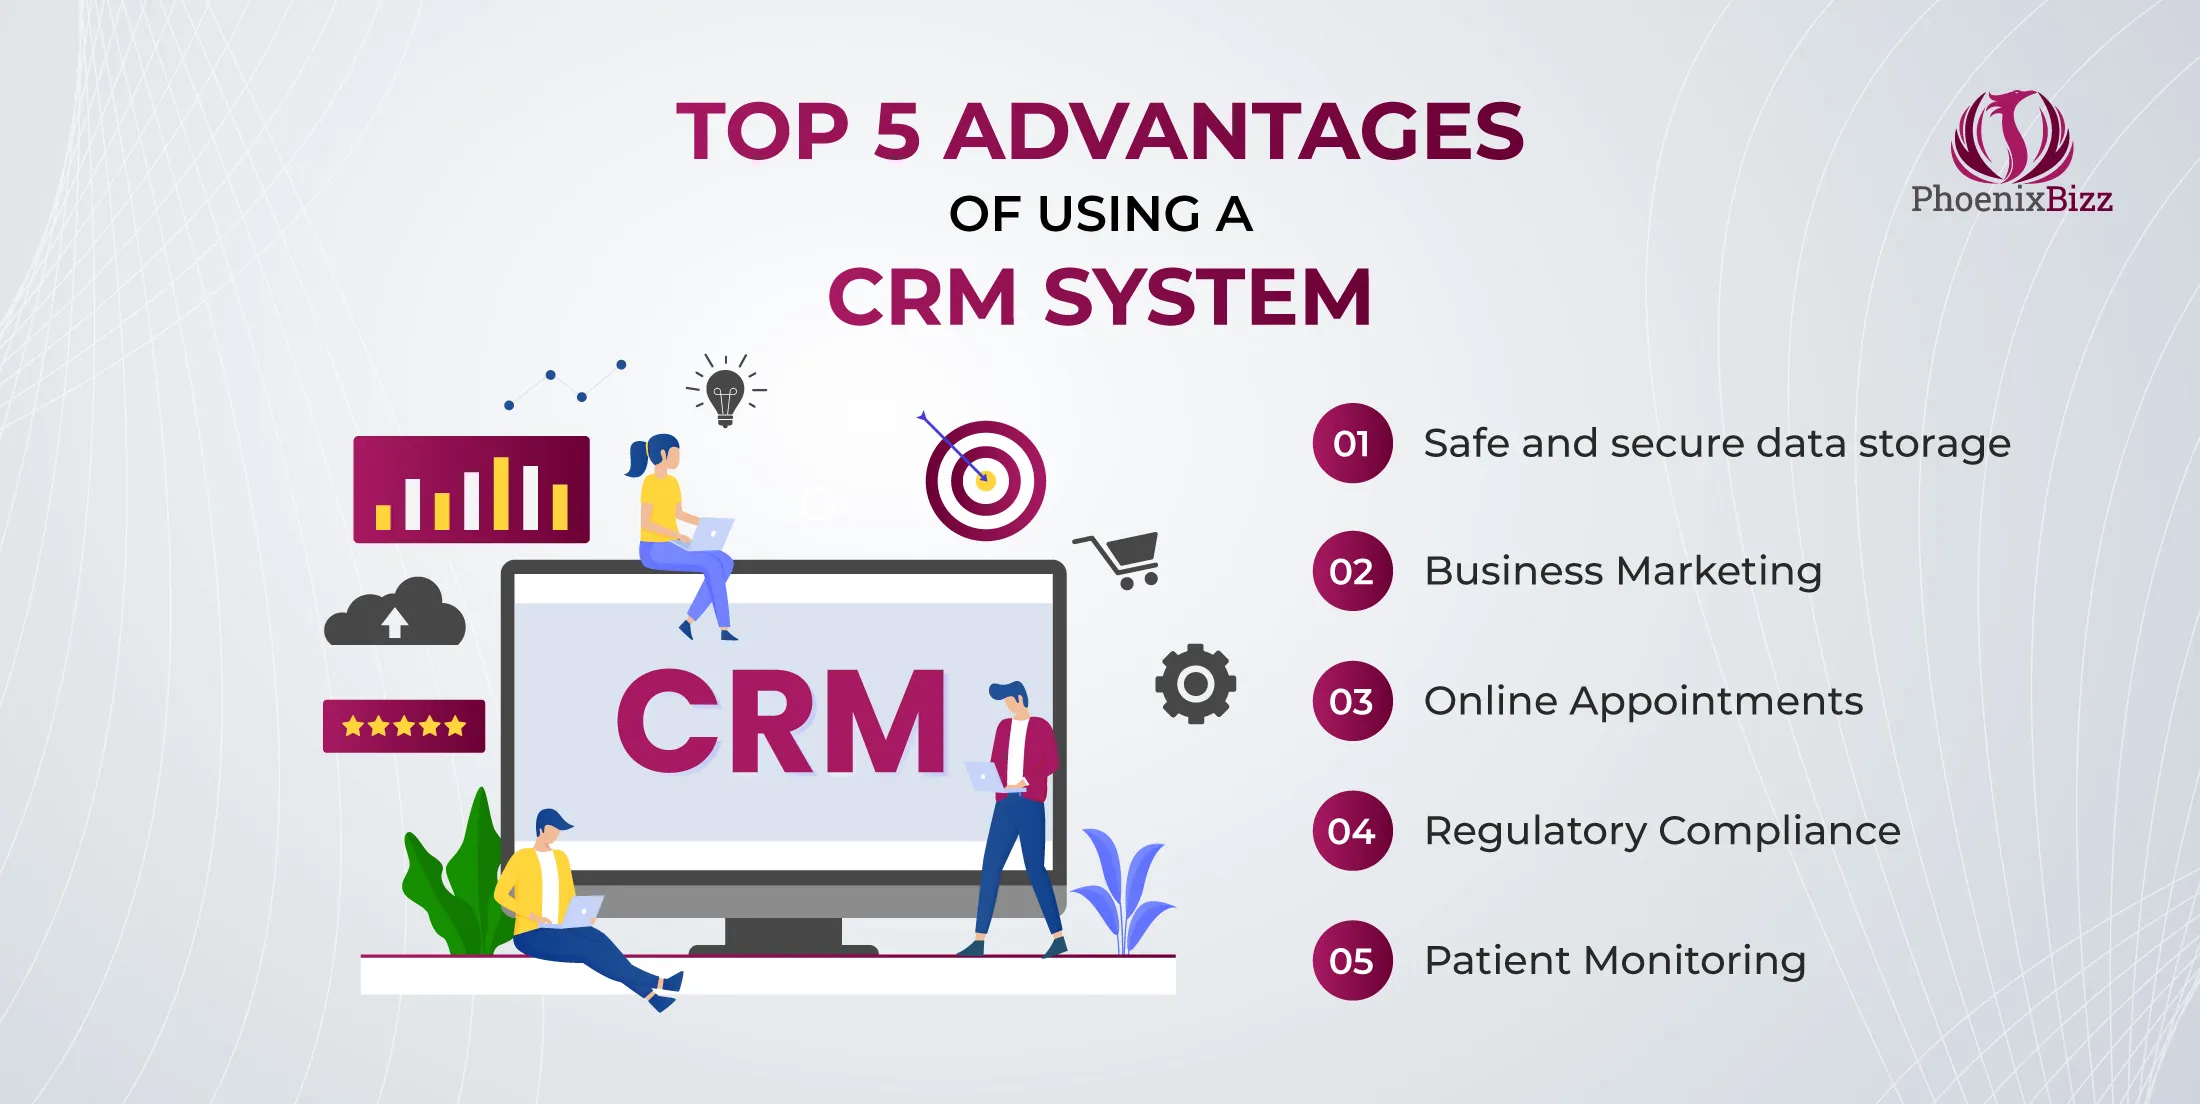 Advantages of using a CRM system